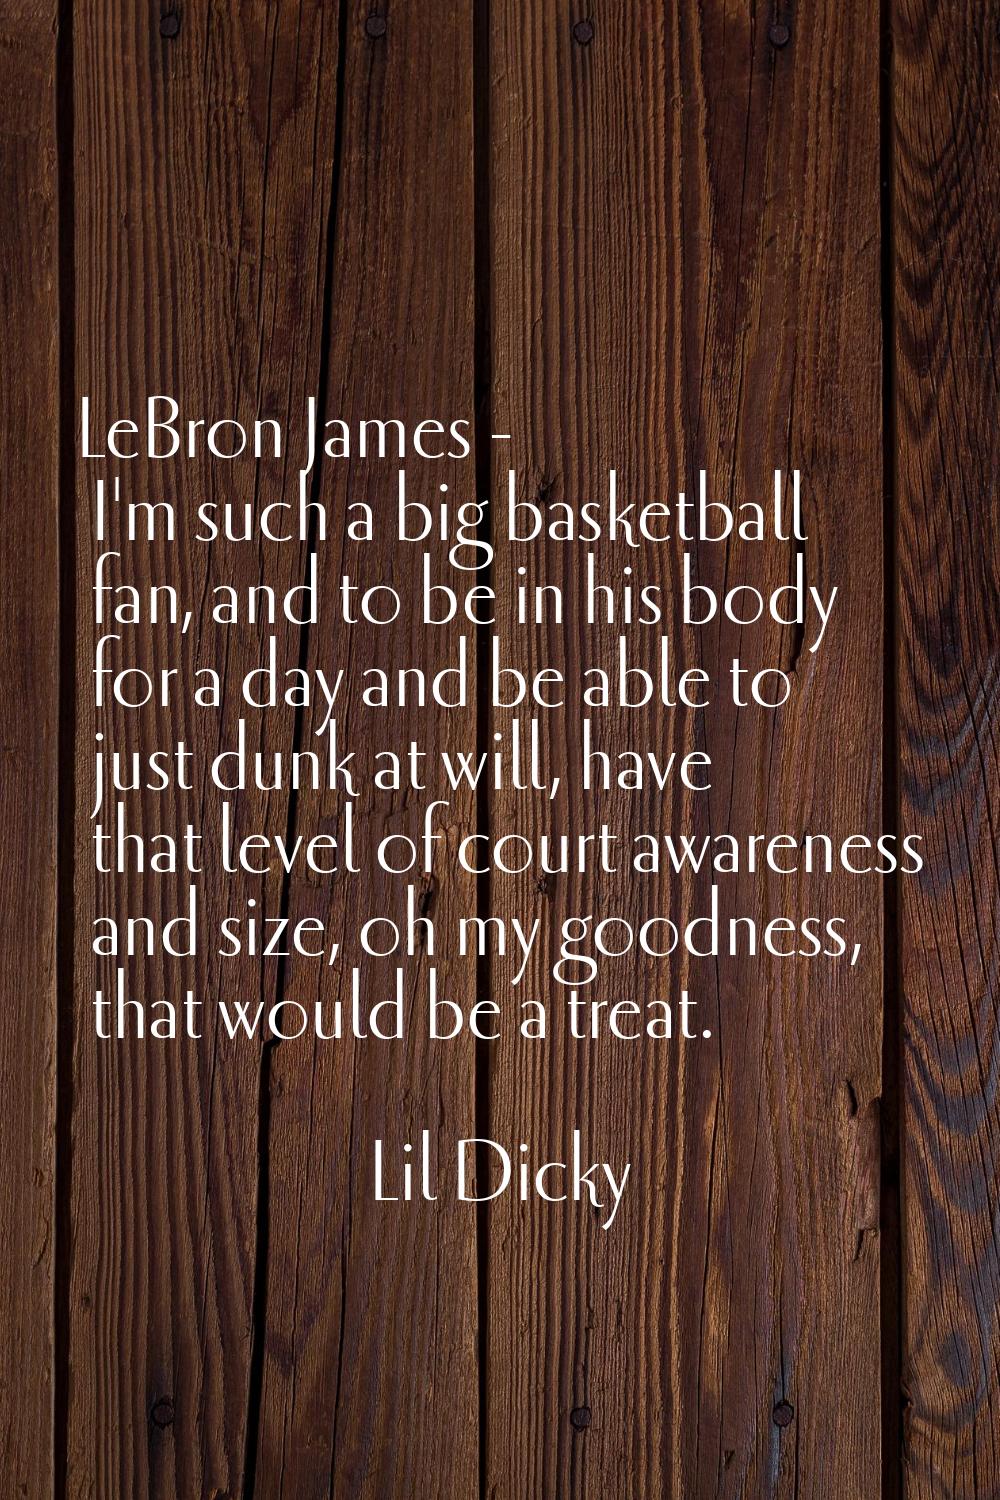 LeBron James - I'm such a big basketball fan, and to be in his body for a day and be able to just d